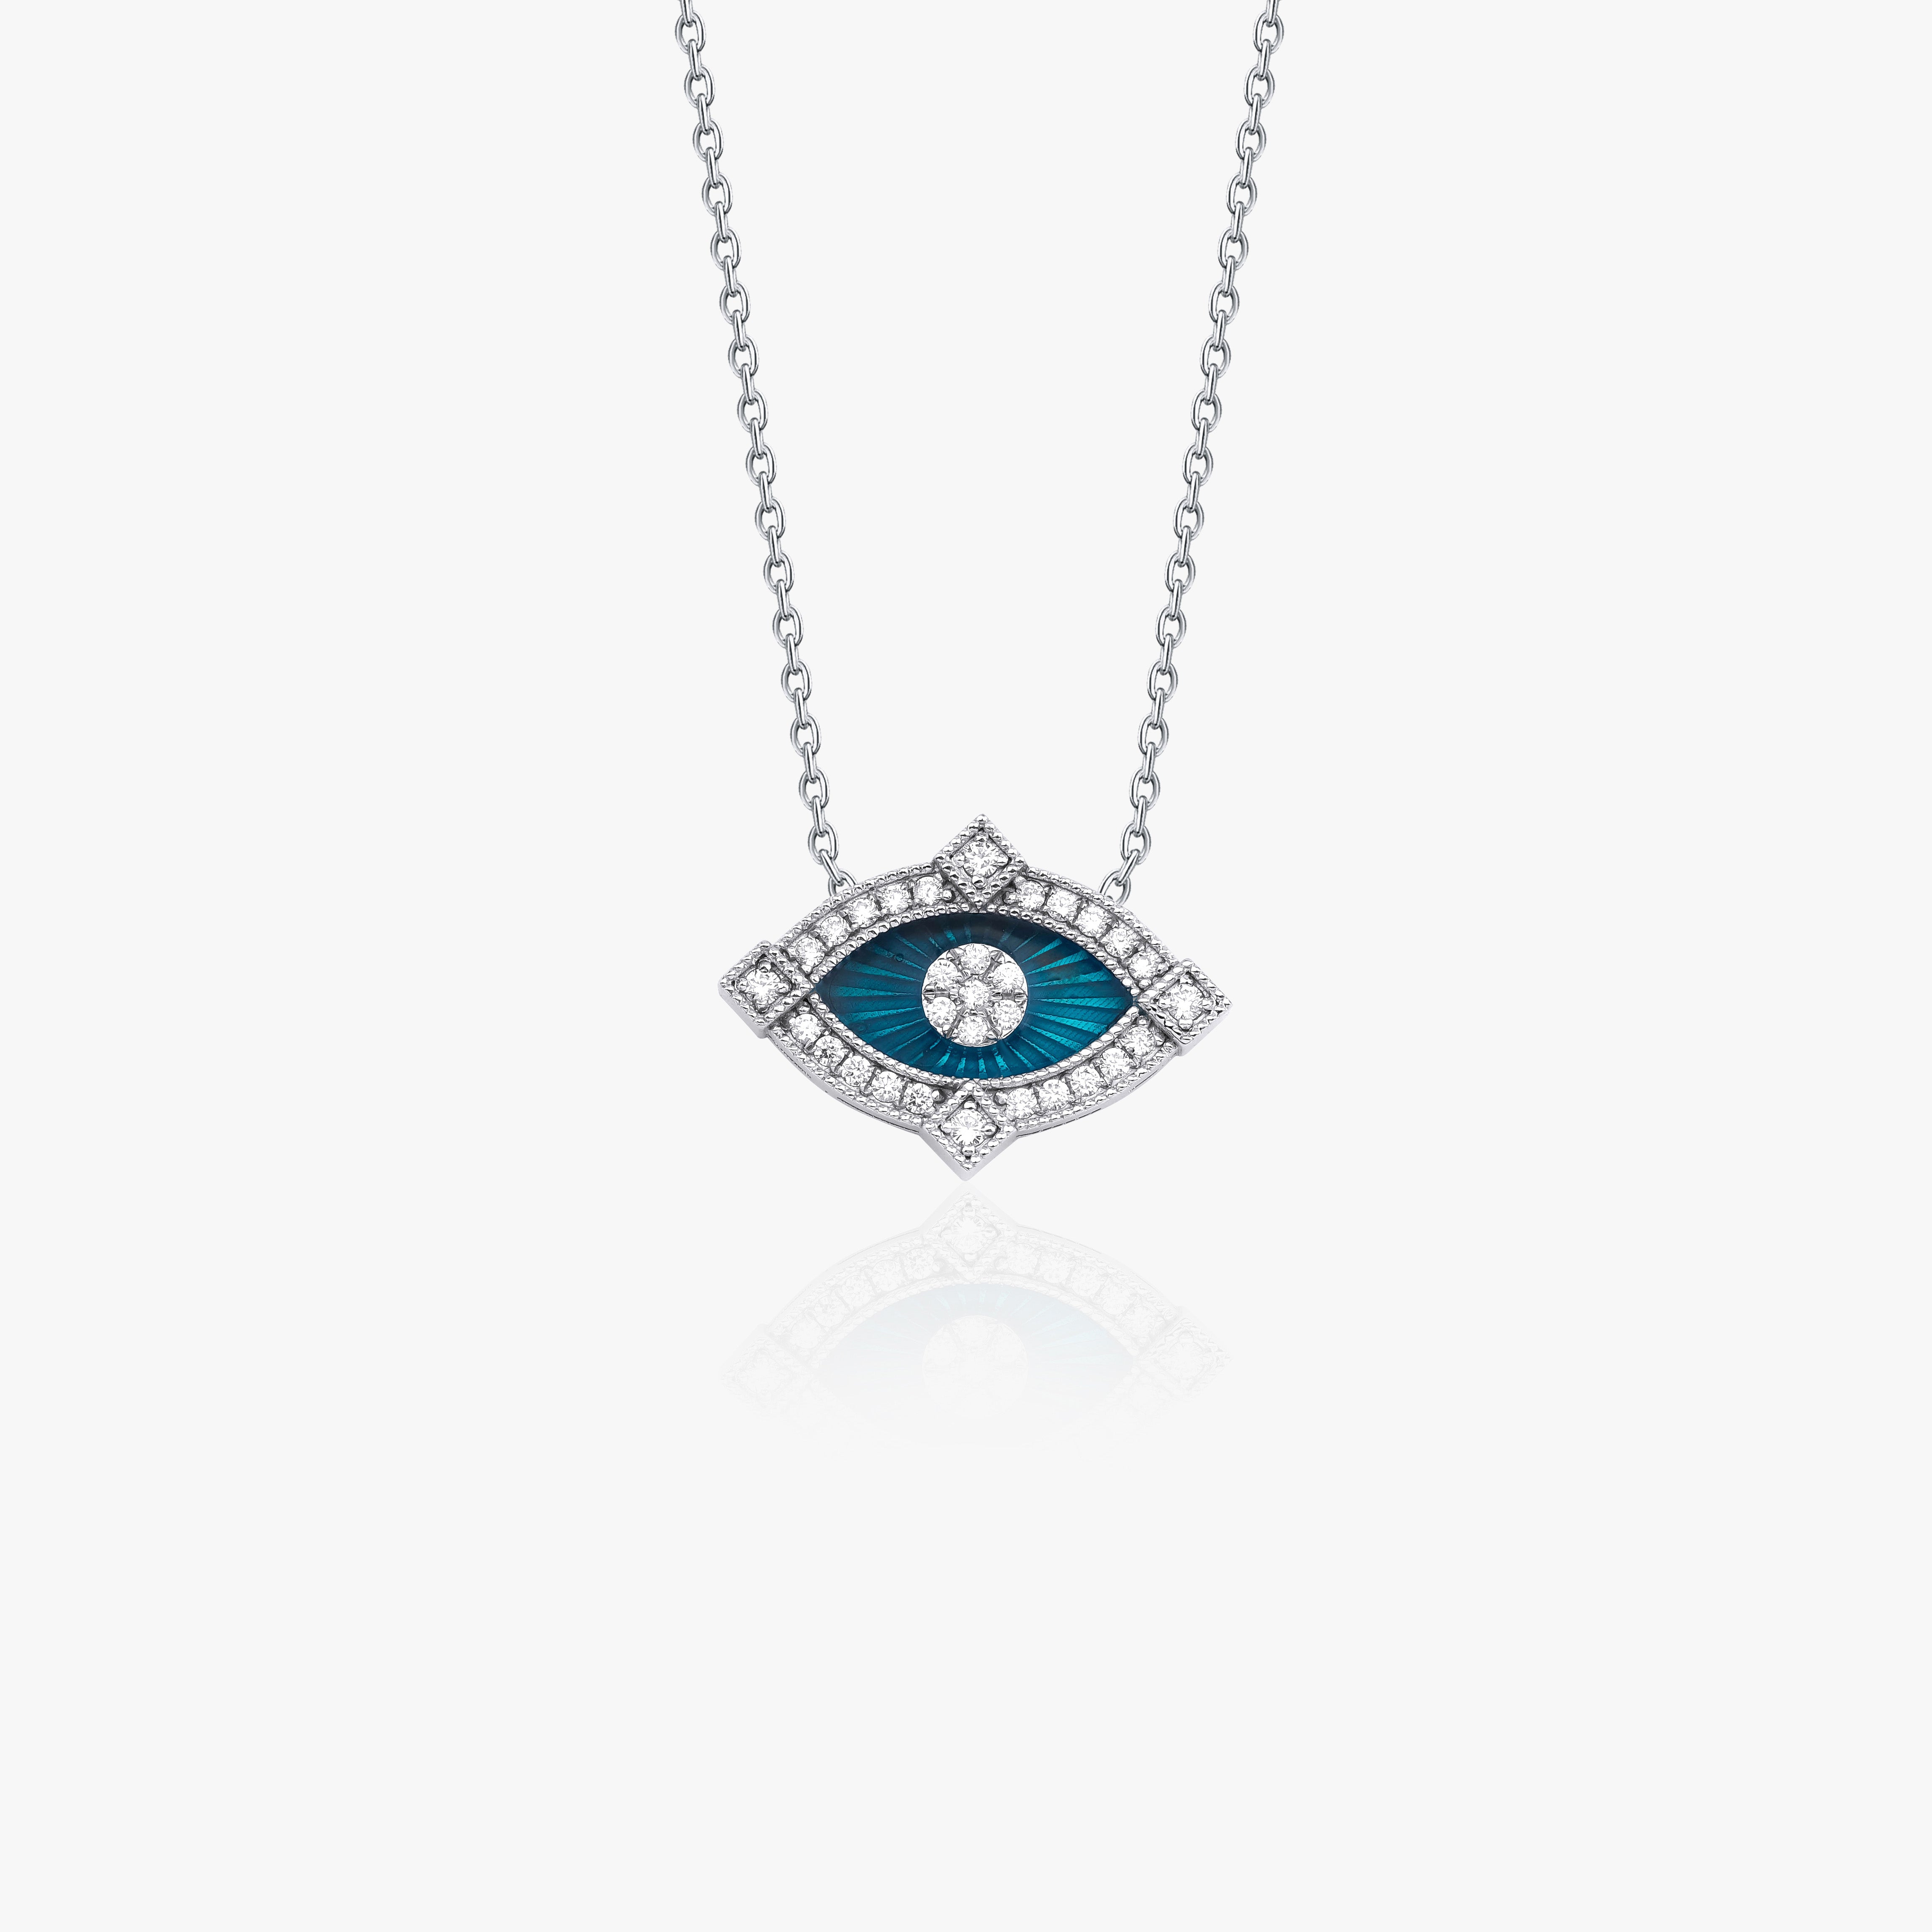 Diamond Evil Eye Necklace Available in 14K and 18K Gold